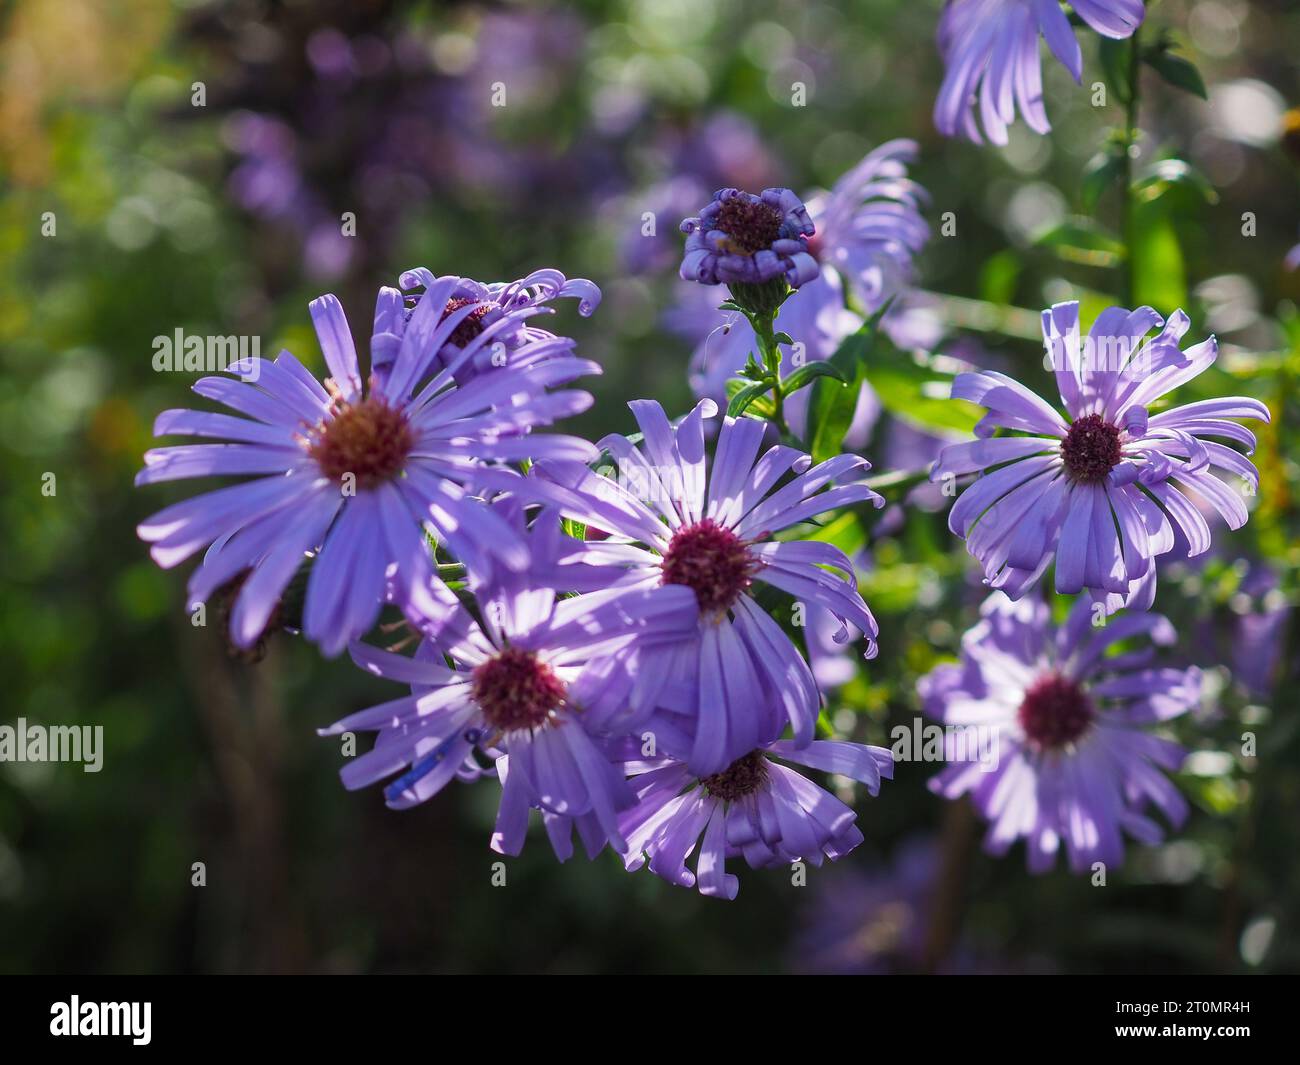 Close up of lilac purple Aster or Michaelmas Daisy flowers (unknown variety) in dappled shade with some petals highlighted by the sun Stock Photo